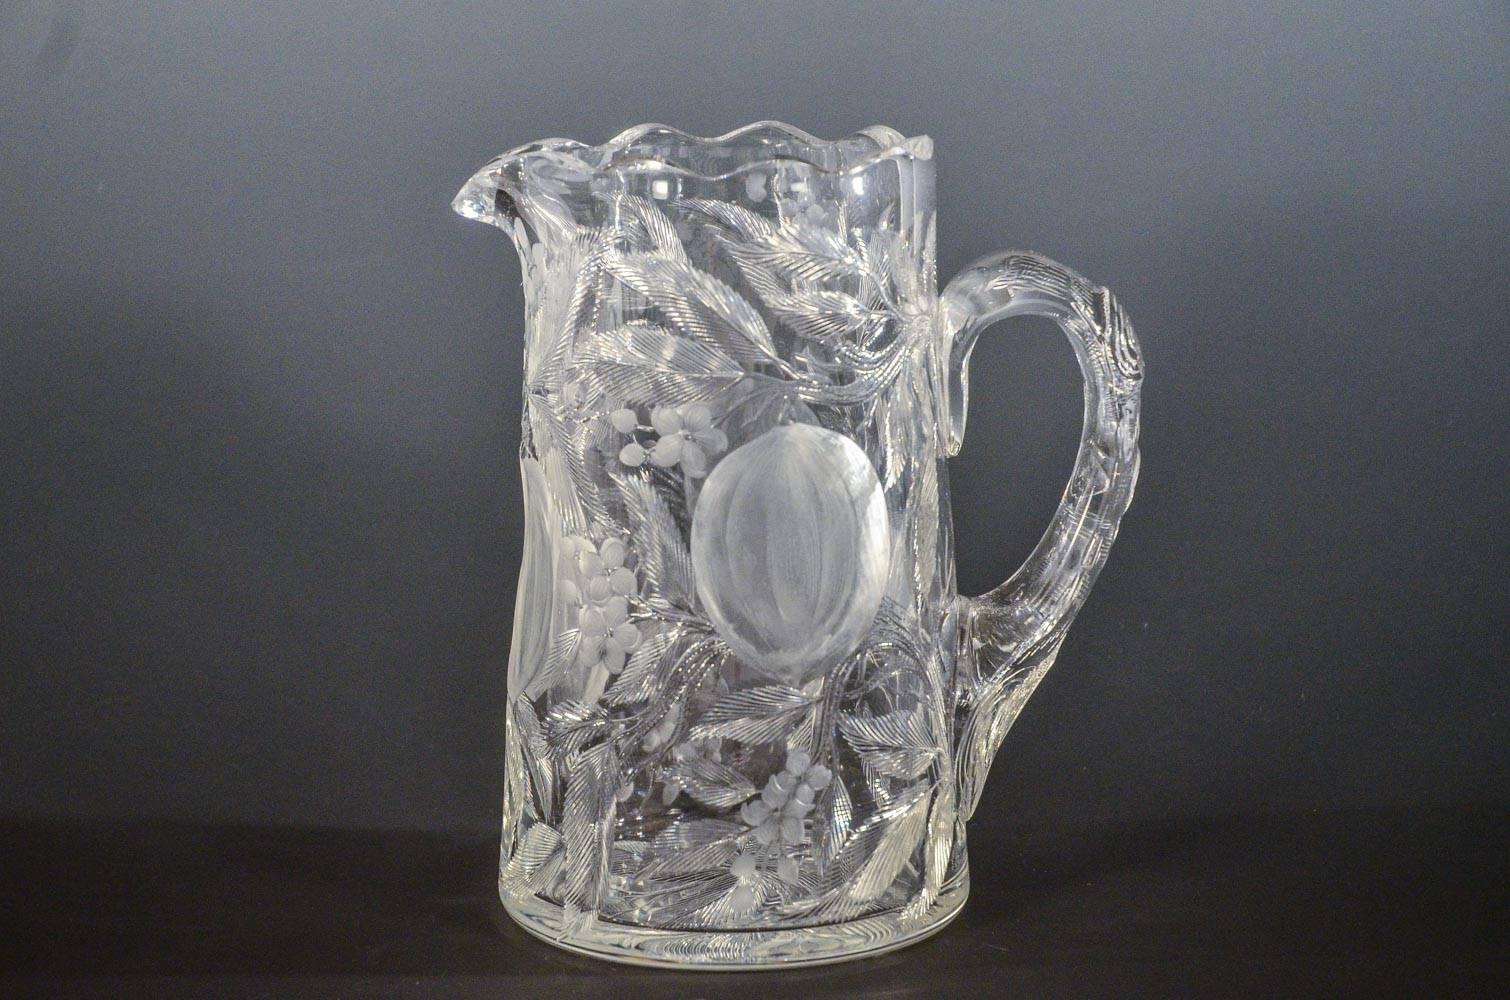  Set of Eight Hawkes Gravic Hand Blown Crystal Tumblers and Matching Pitcher 8